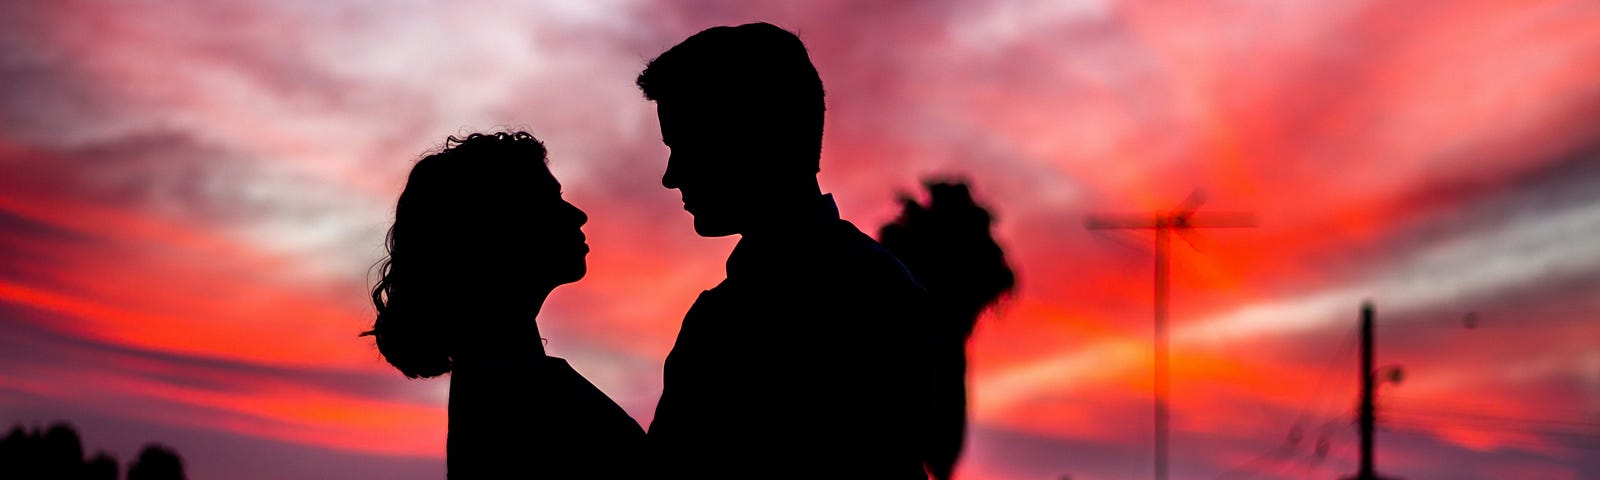 Photo of a man and woman’s silhouettes looking at each other, with a purple and red sunset sky behind them.